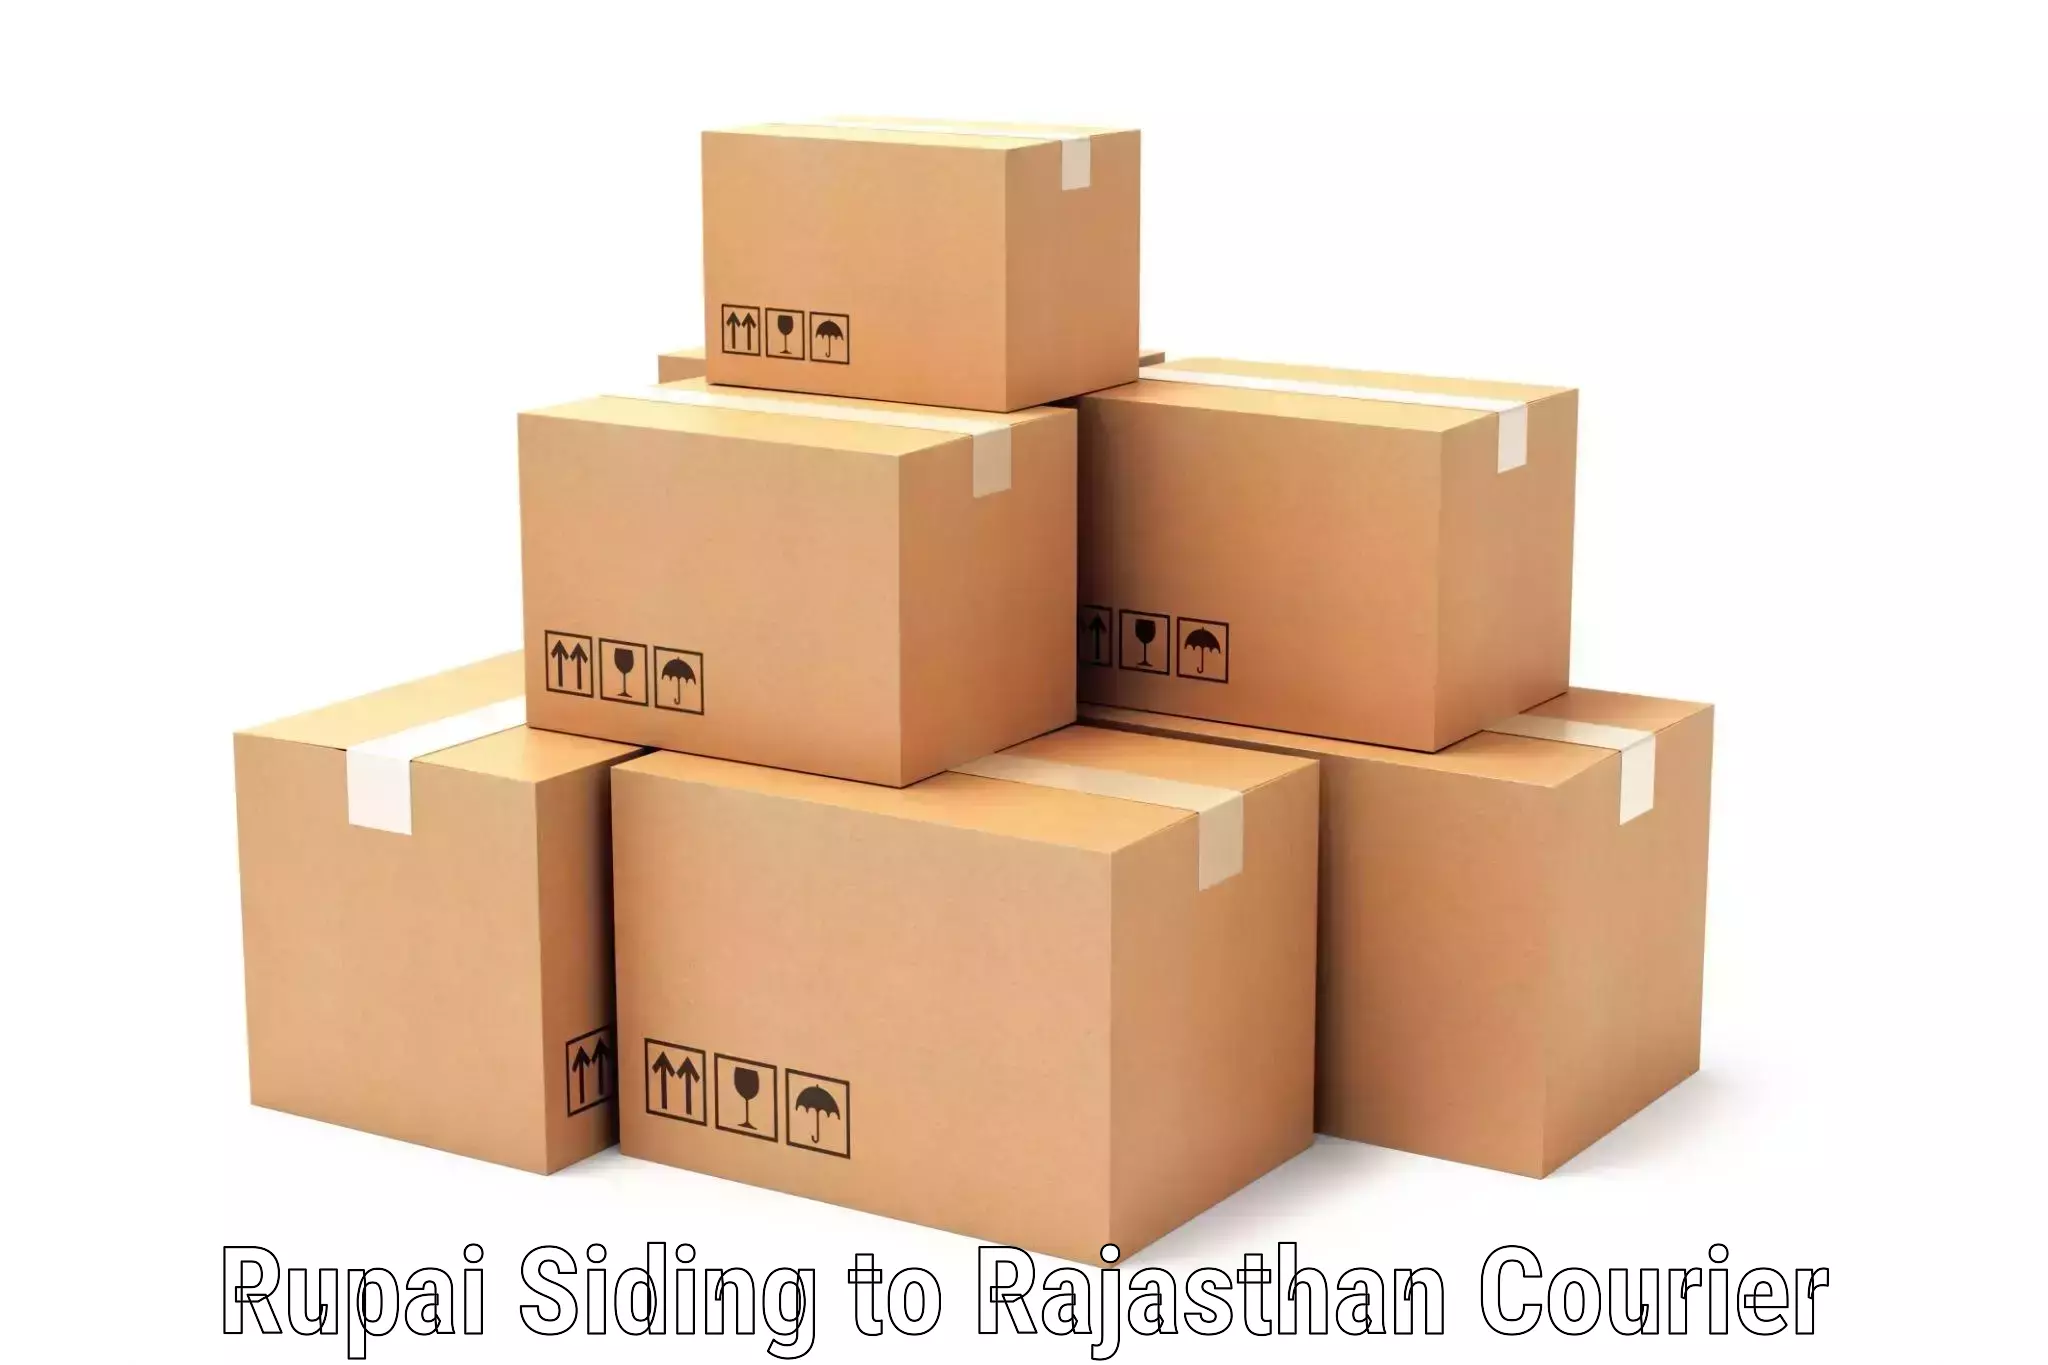 Cash on delivery service Rupai Siding to Jaipur